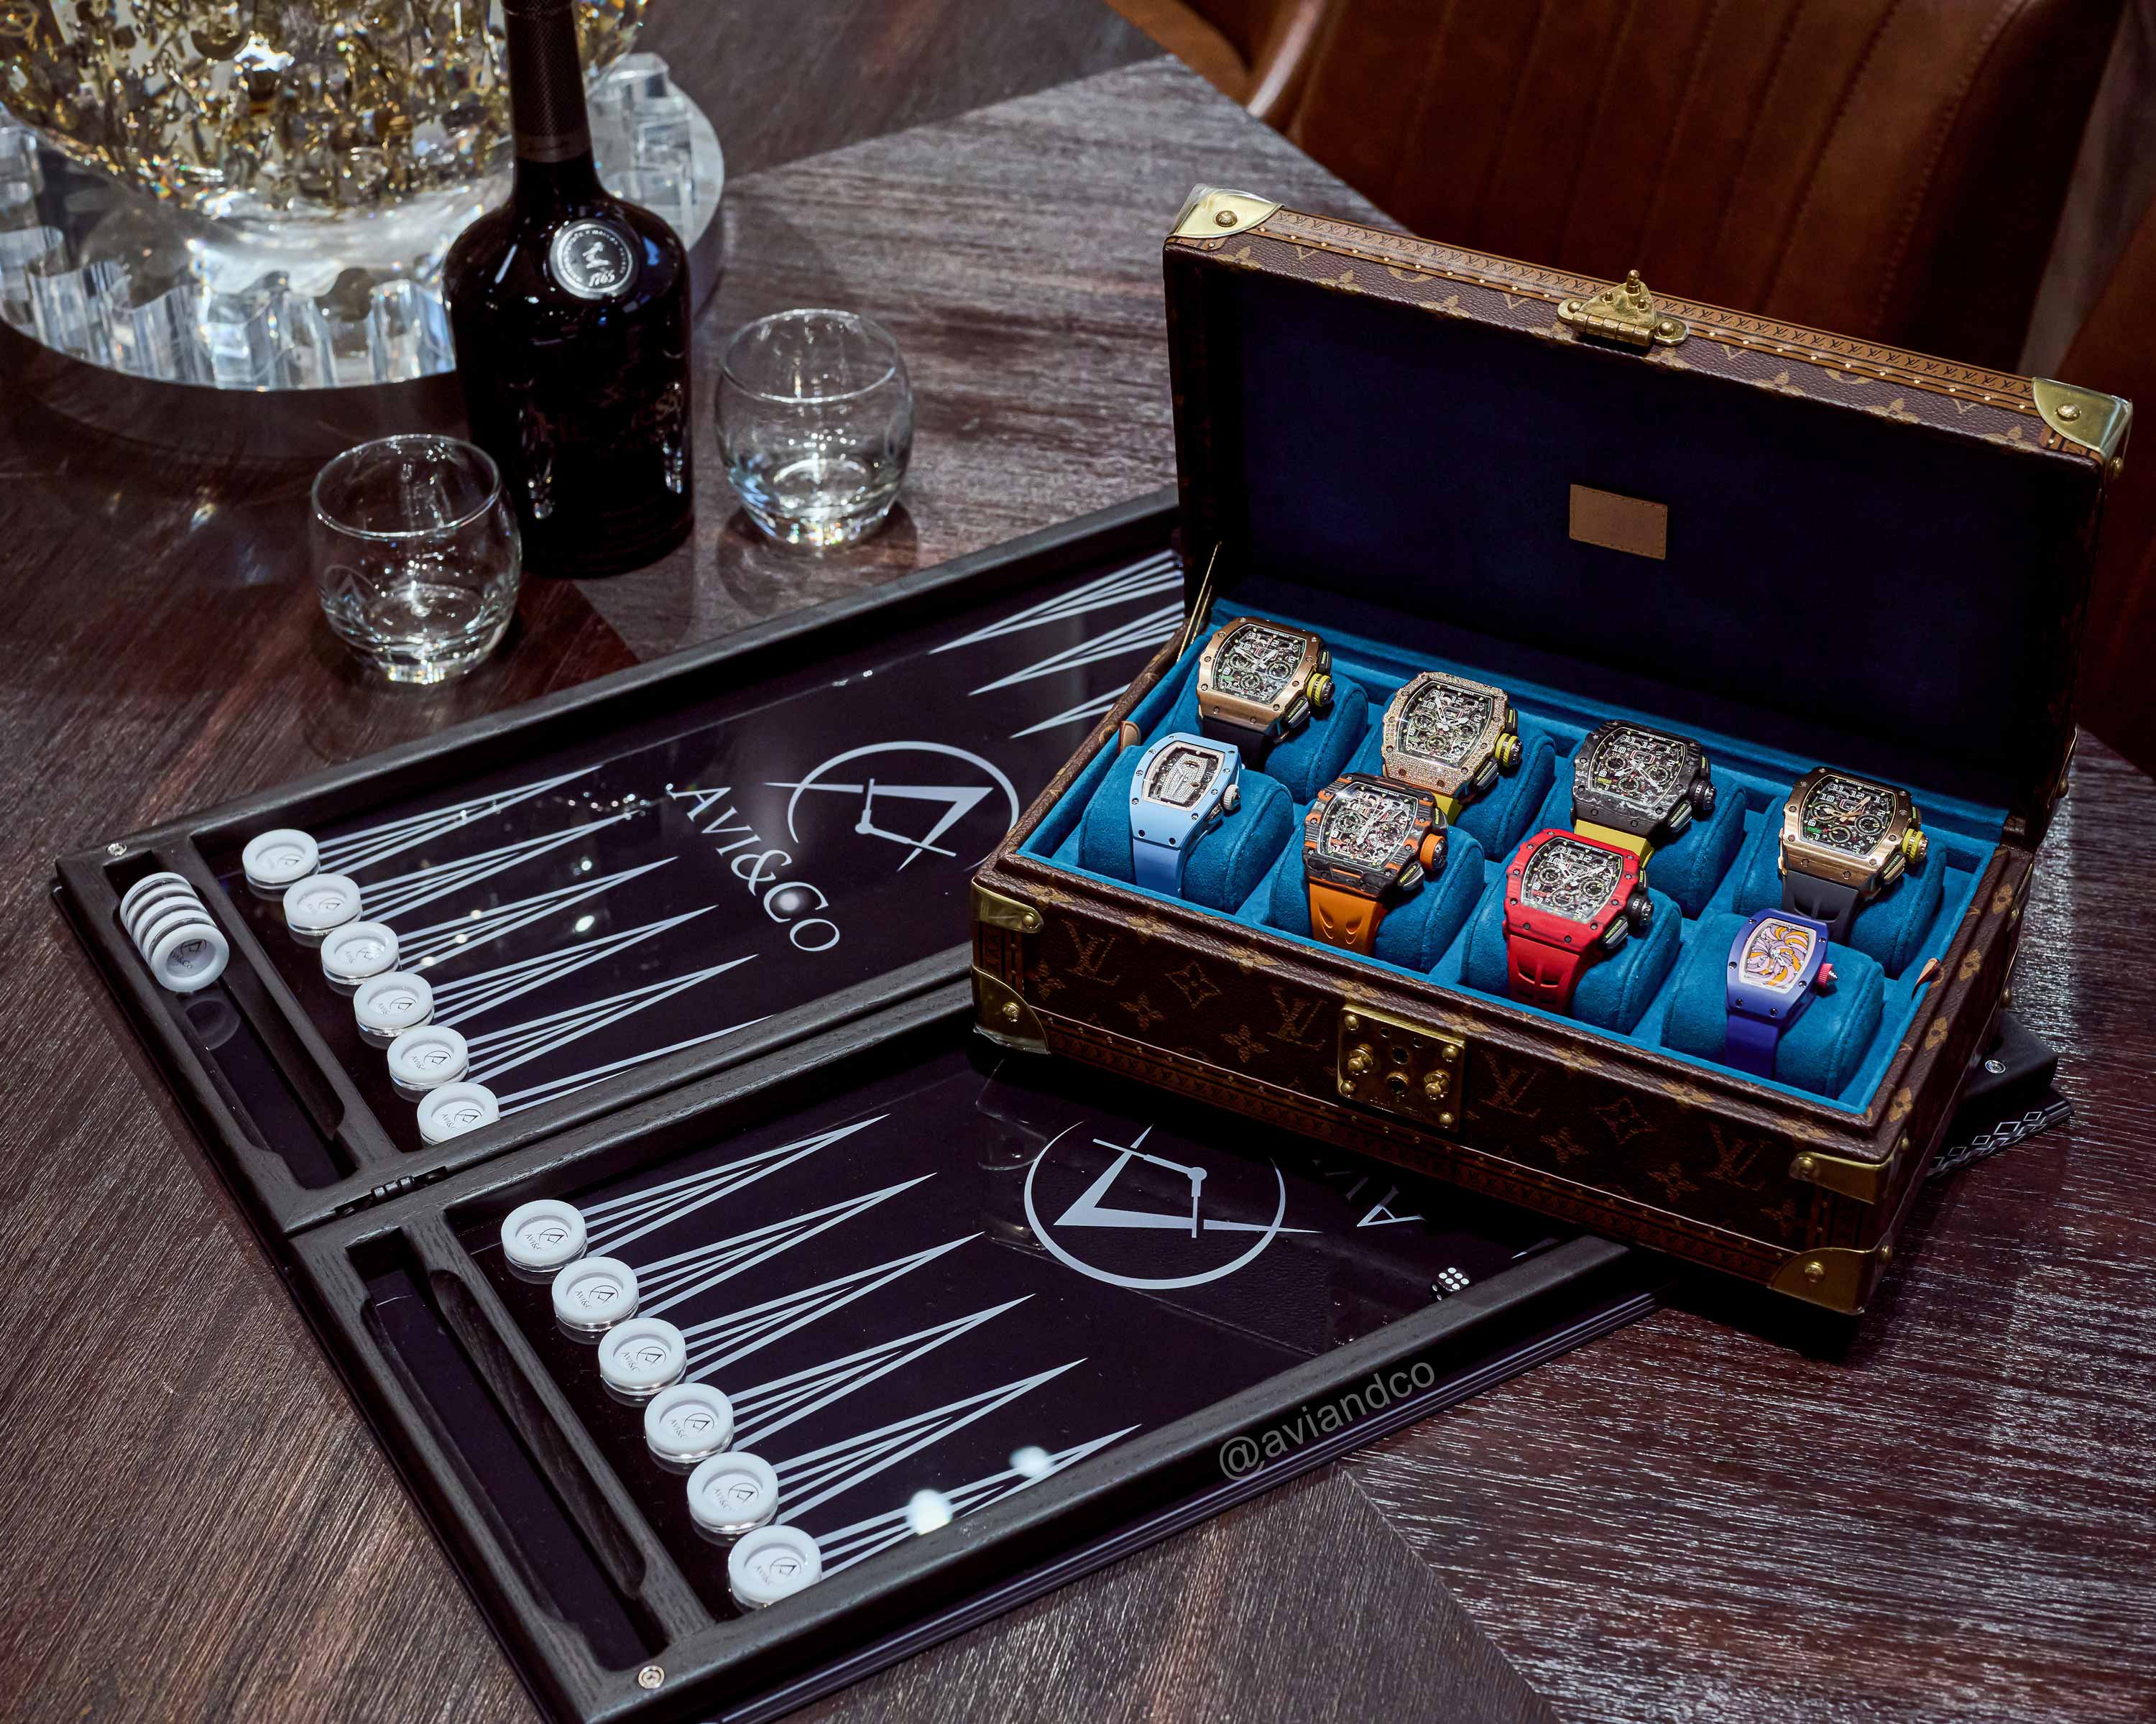 Eight Richard Mille Luxury Timepieces in a Brown Watch Case Displayed on Top of an Avi & Co. Backgammon Game on a Brown Table.